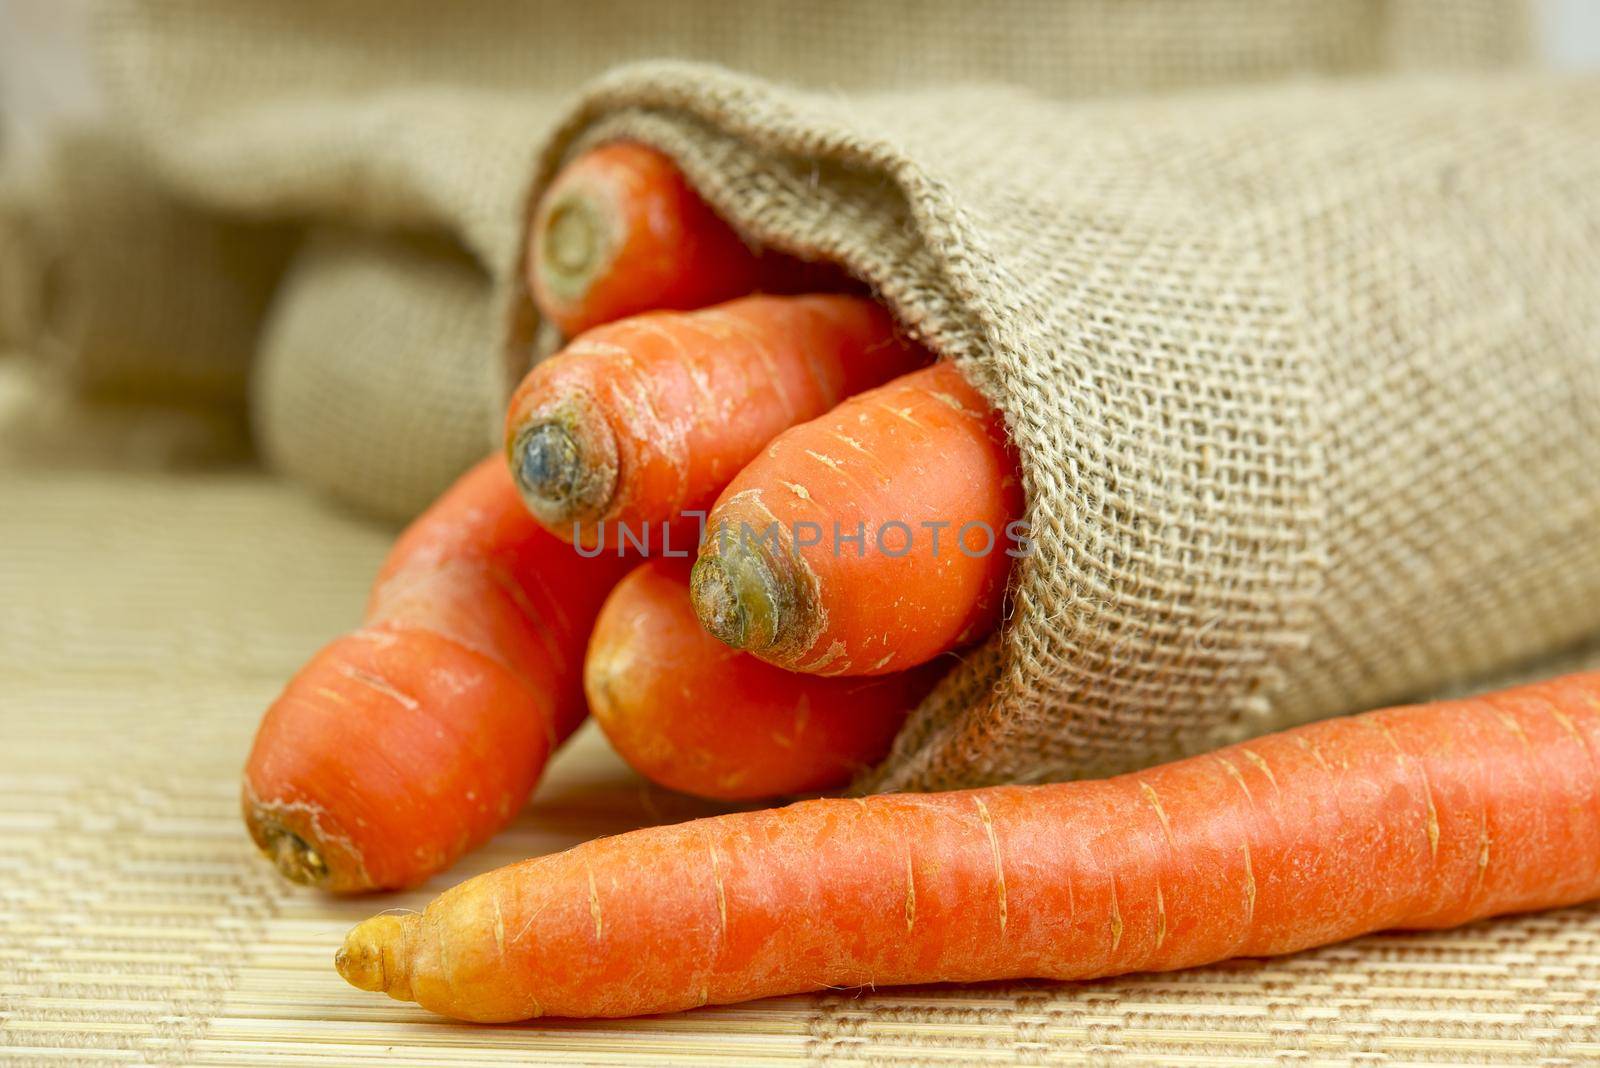 Fresh Carrots in Linen Bag Material. Organic Carrots. Vegetables Photo Collection.